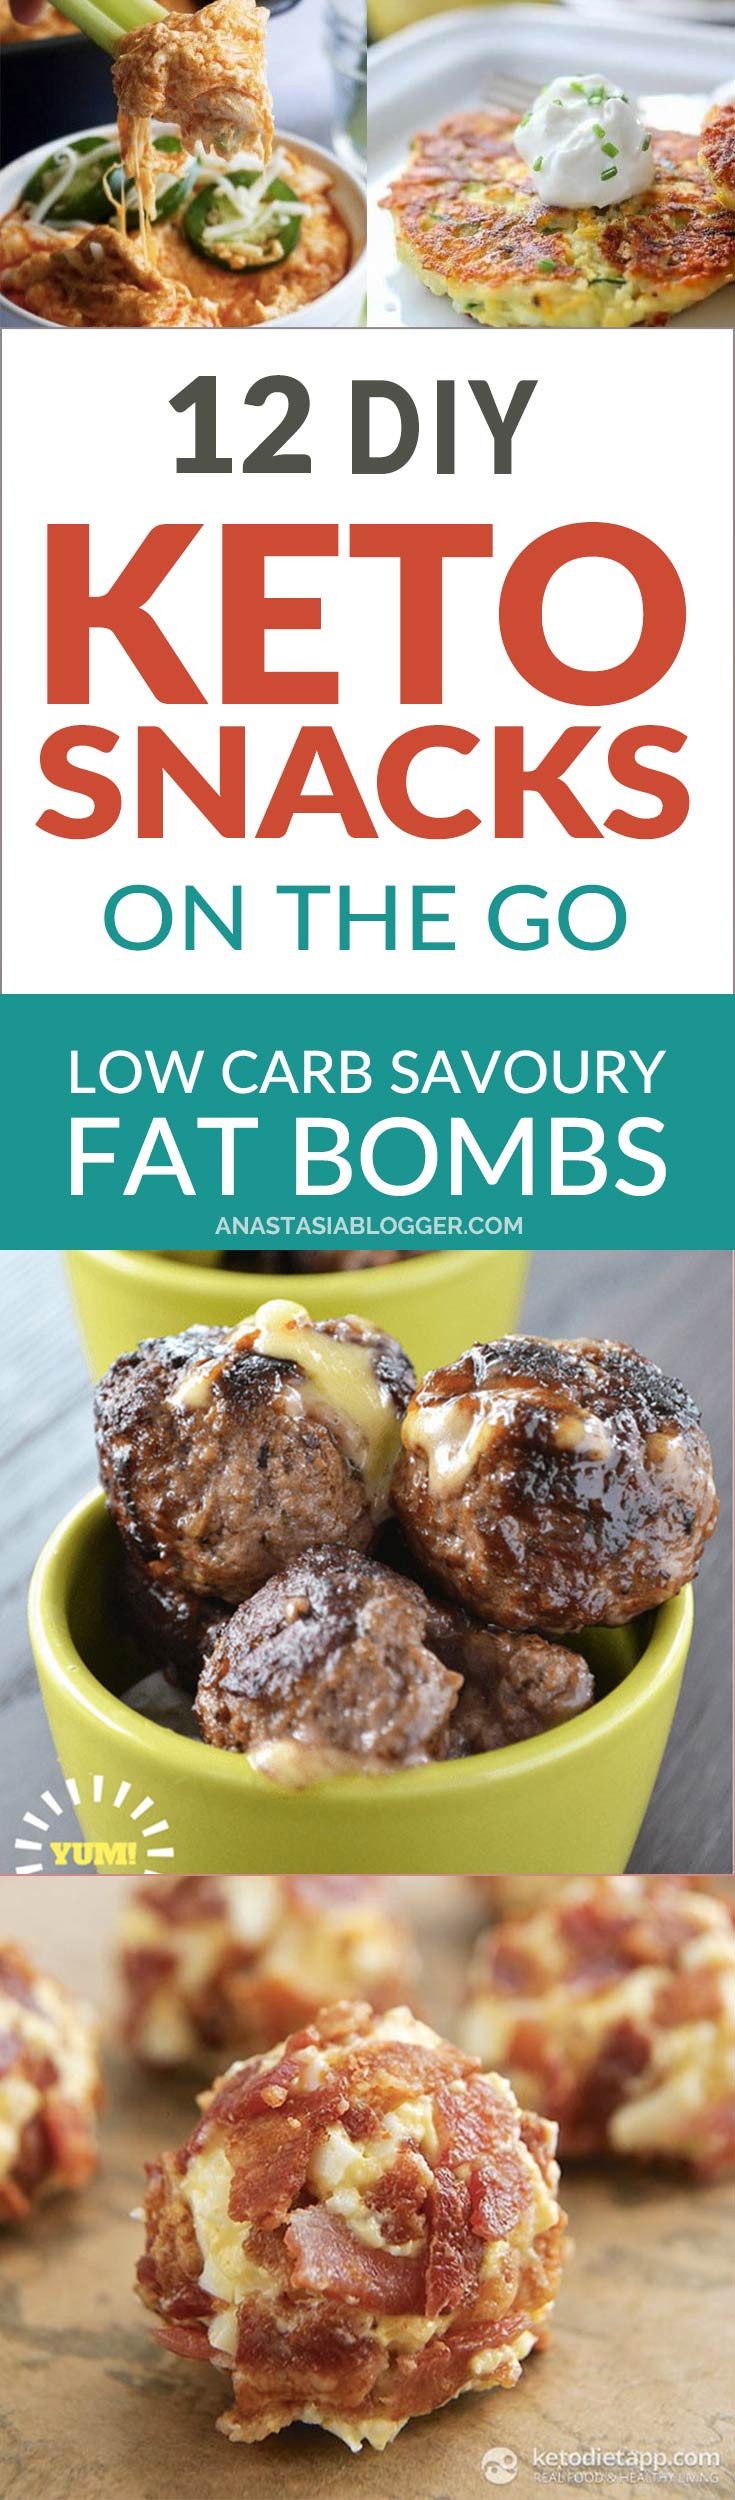 Low Carb Keto Snacks On The Go
 12 DIY Keto Snacks the Go Low Carb Savoury Fat Bombs